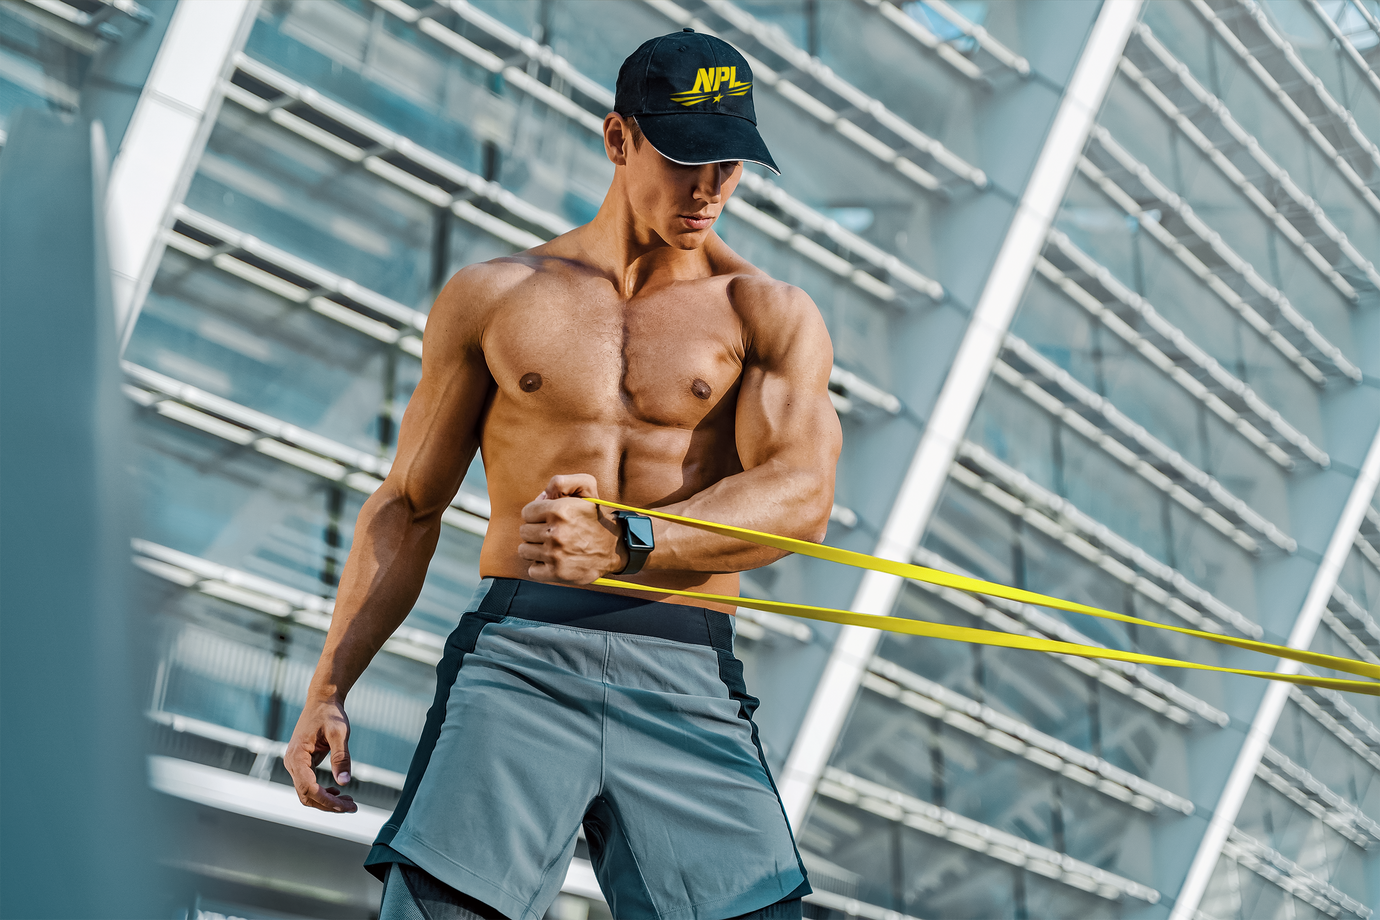 Keen to stay lean this summer? Let us tell you how.